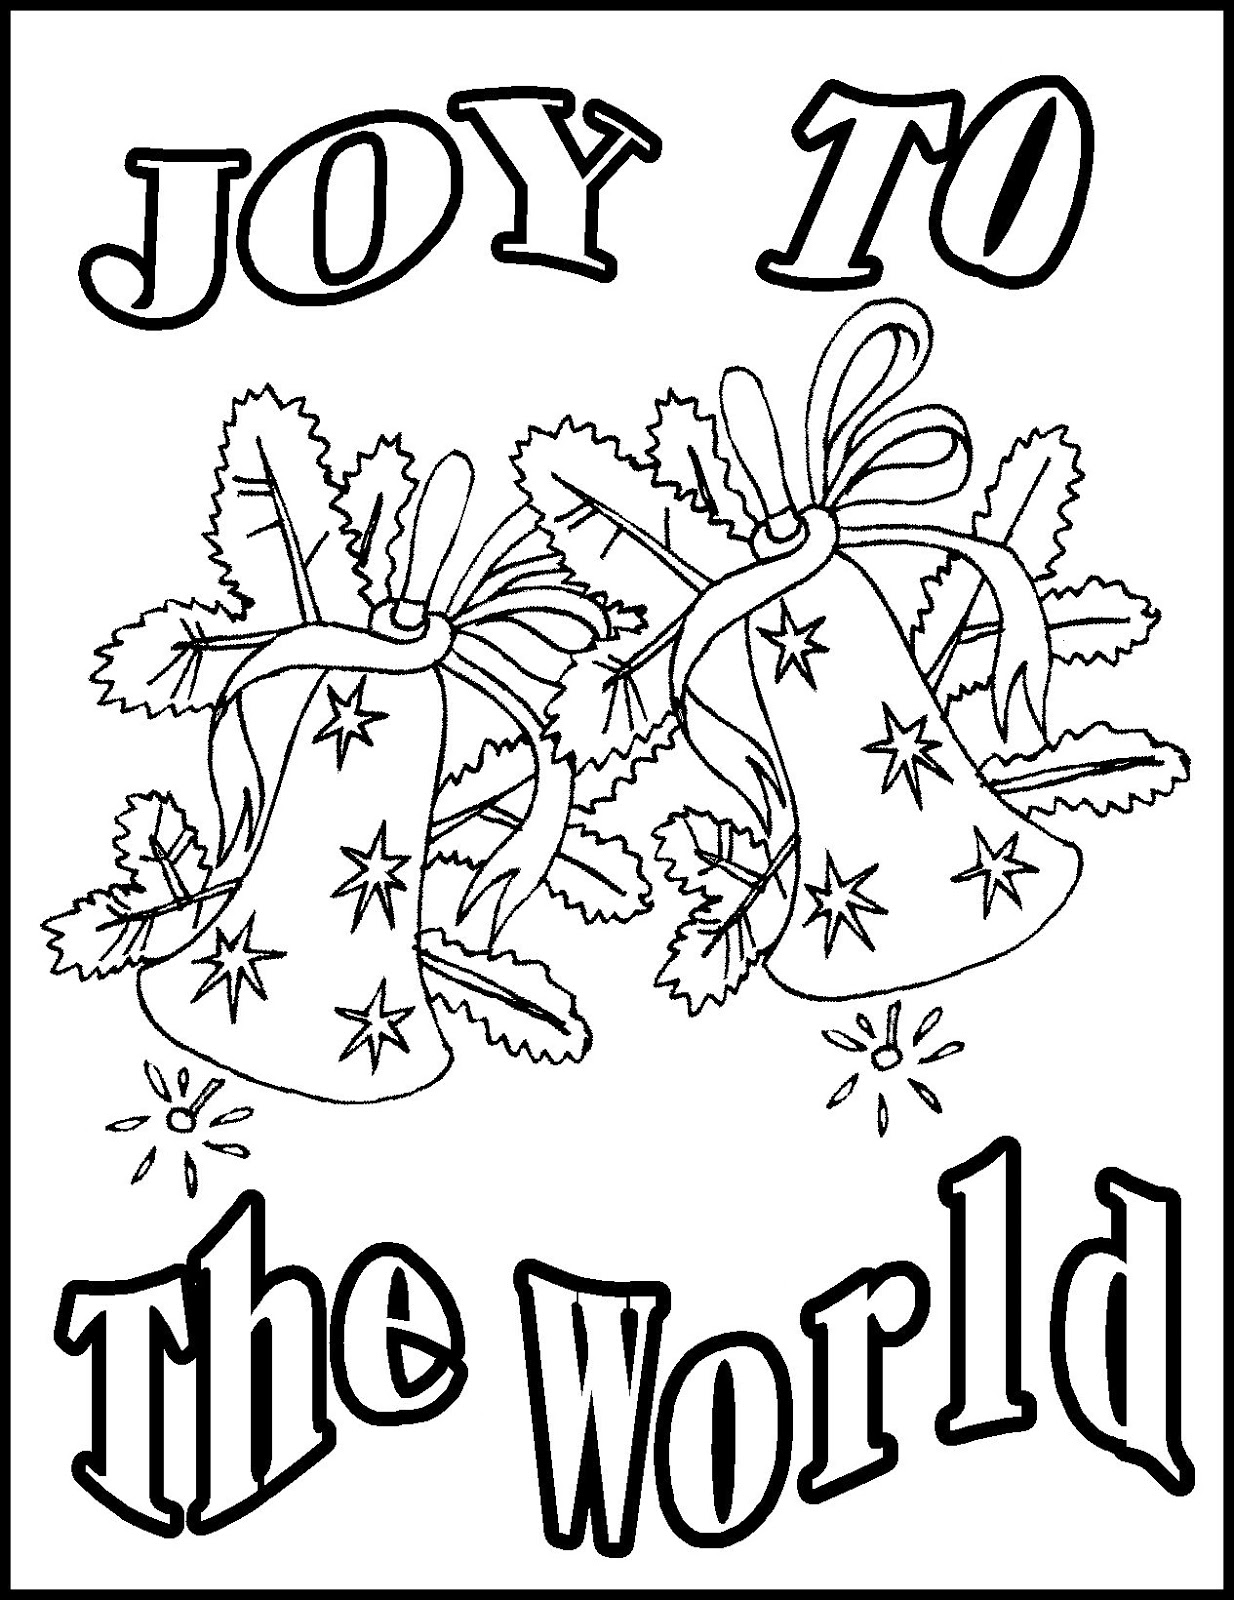 merry-christmas-coloring-pages-that-say-merry-christmas-at